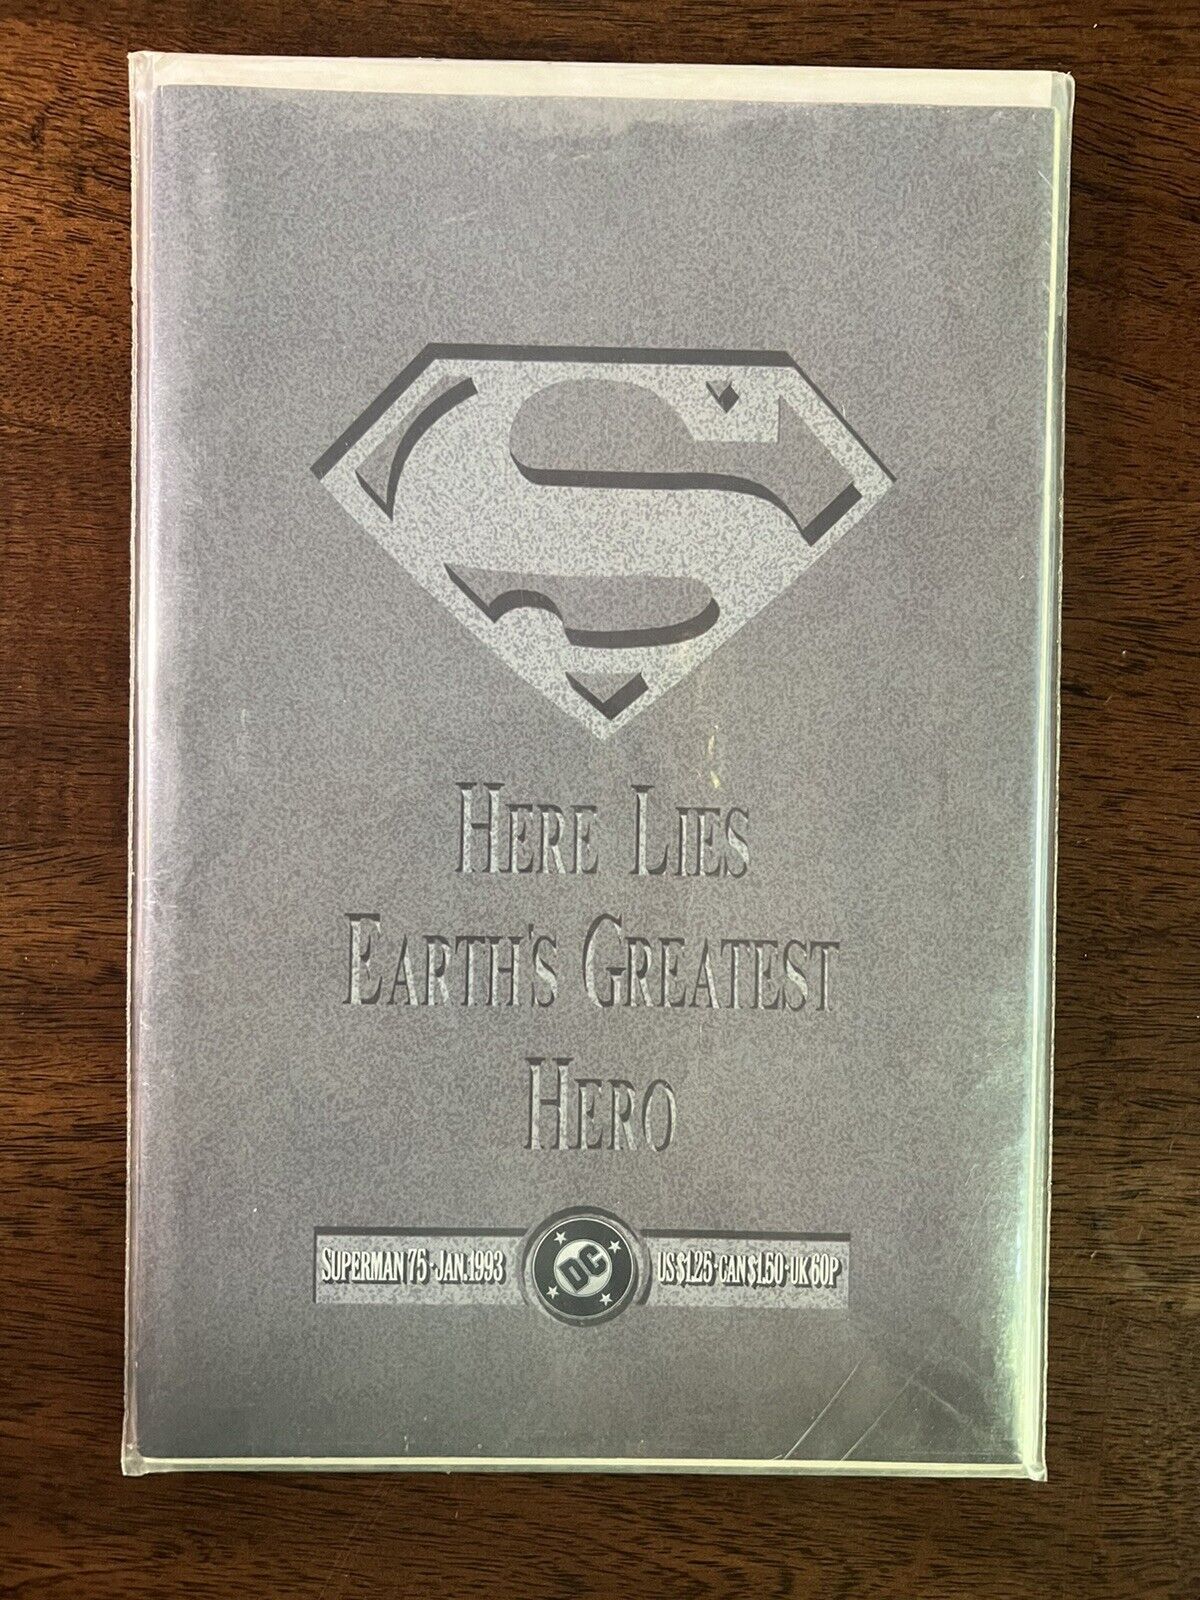 1993 Superman #75 Here Lies Earth’s Greatest Hero DC Items Included